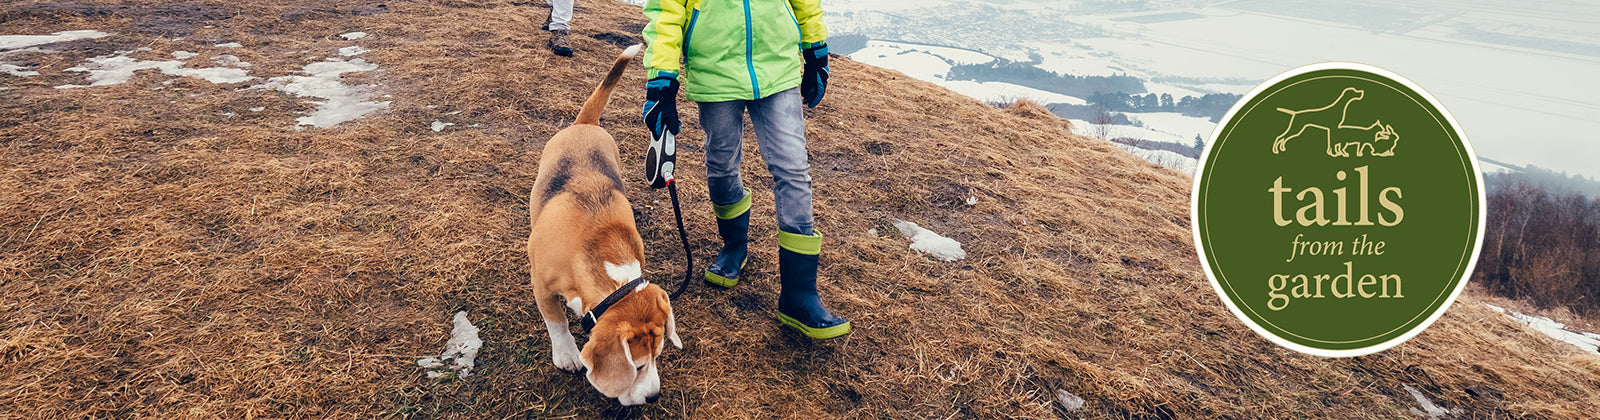 Top tips for winter dog walking